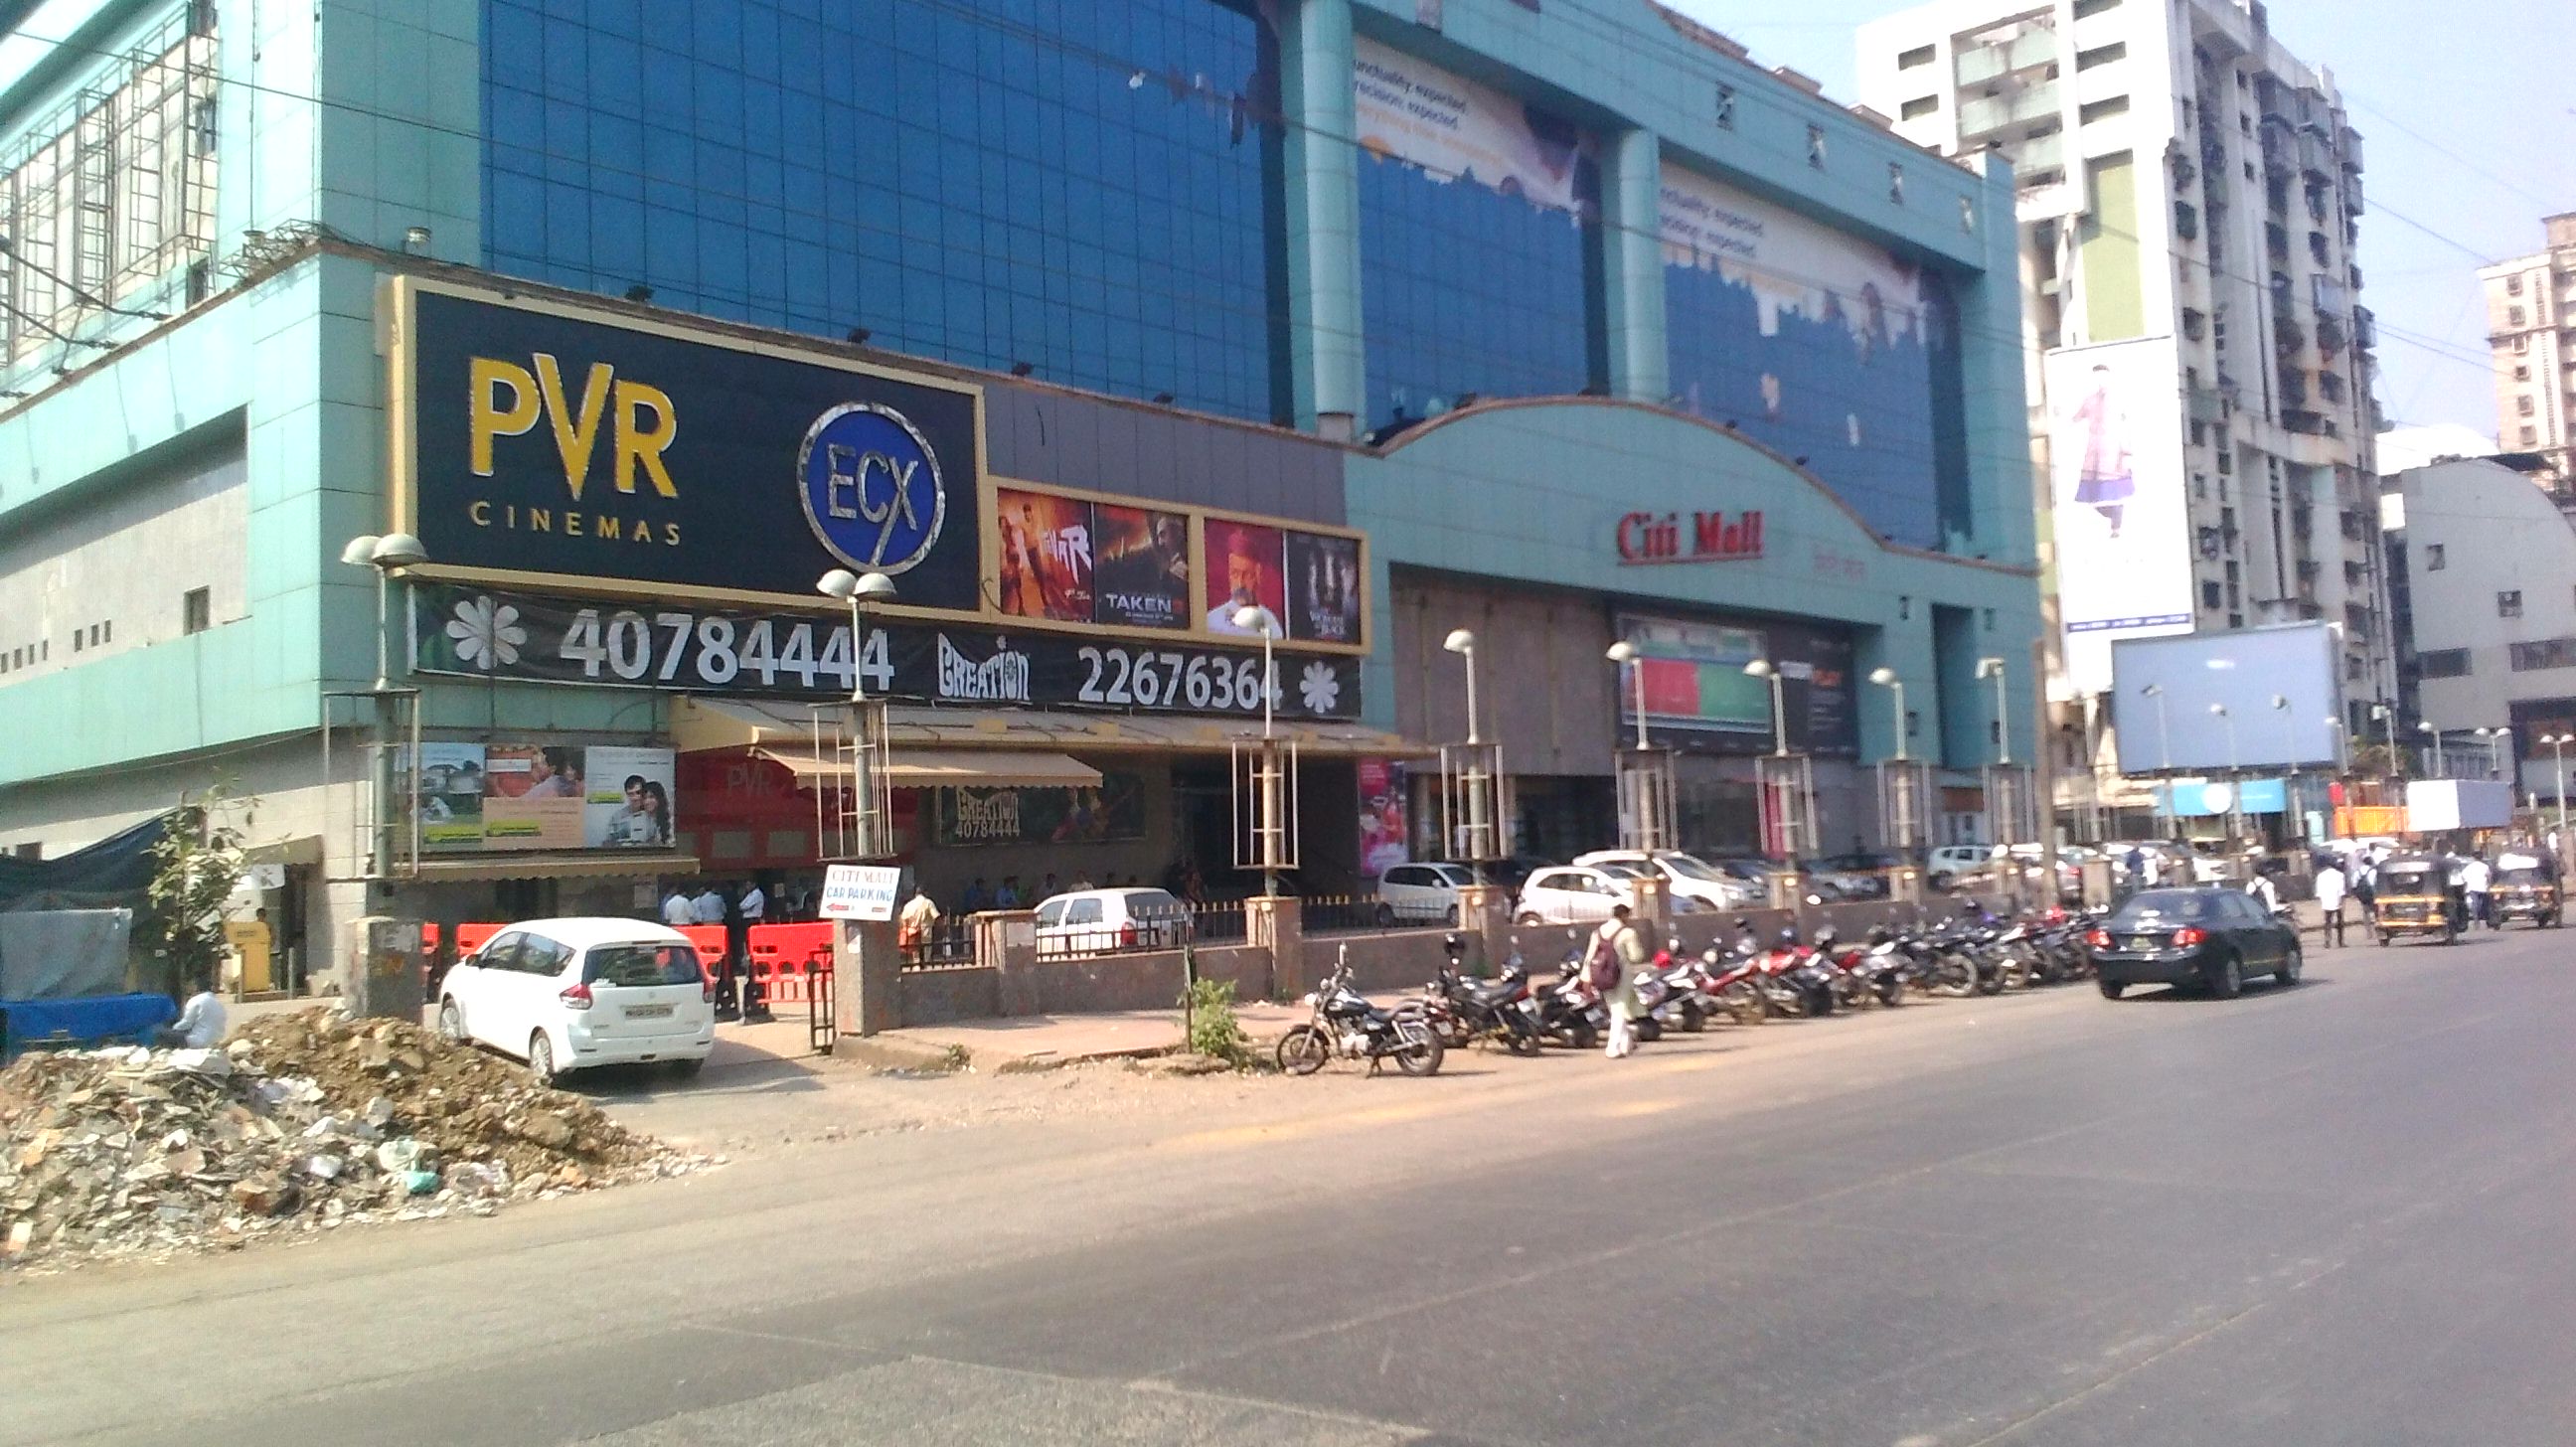 Commercial Office Space for Rent in Commercial Office Space for Rent, Linking Road,, Andheri-West, Mumbai